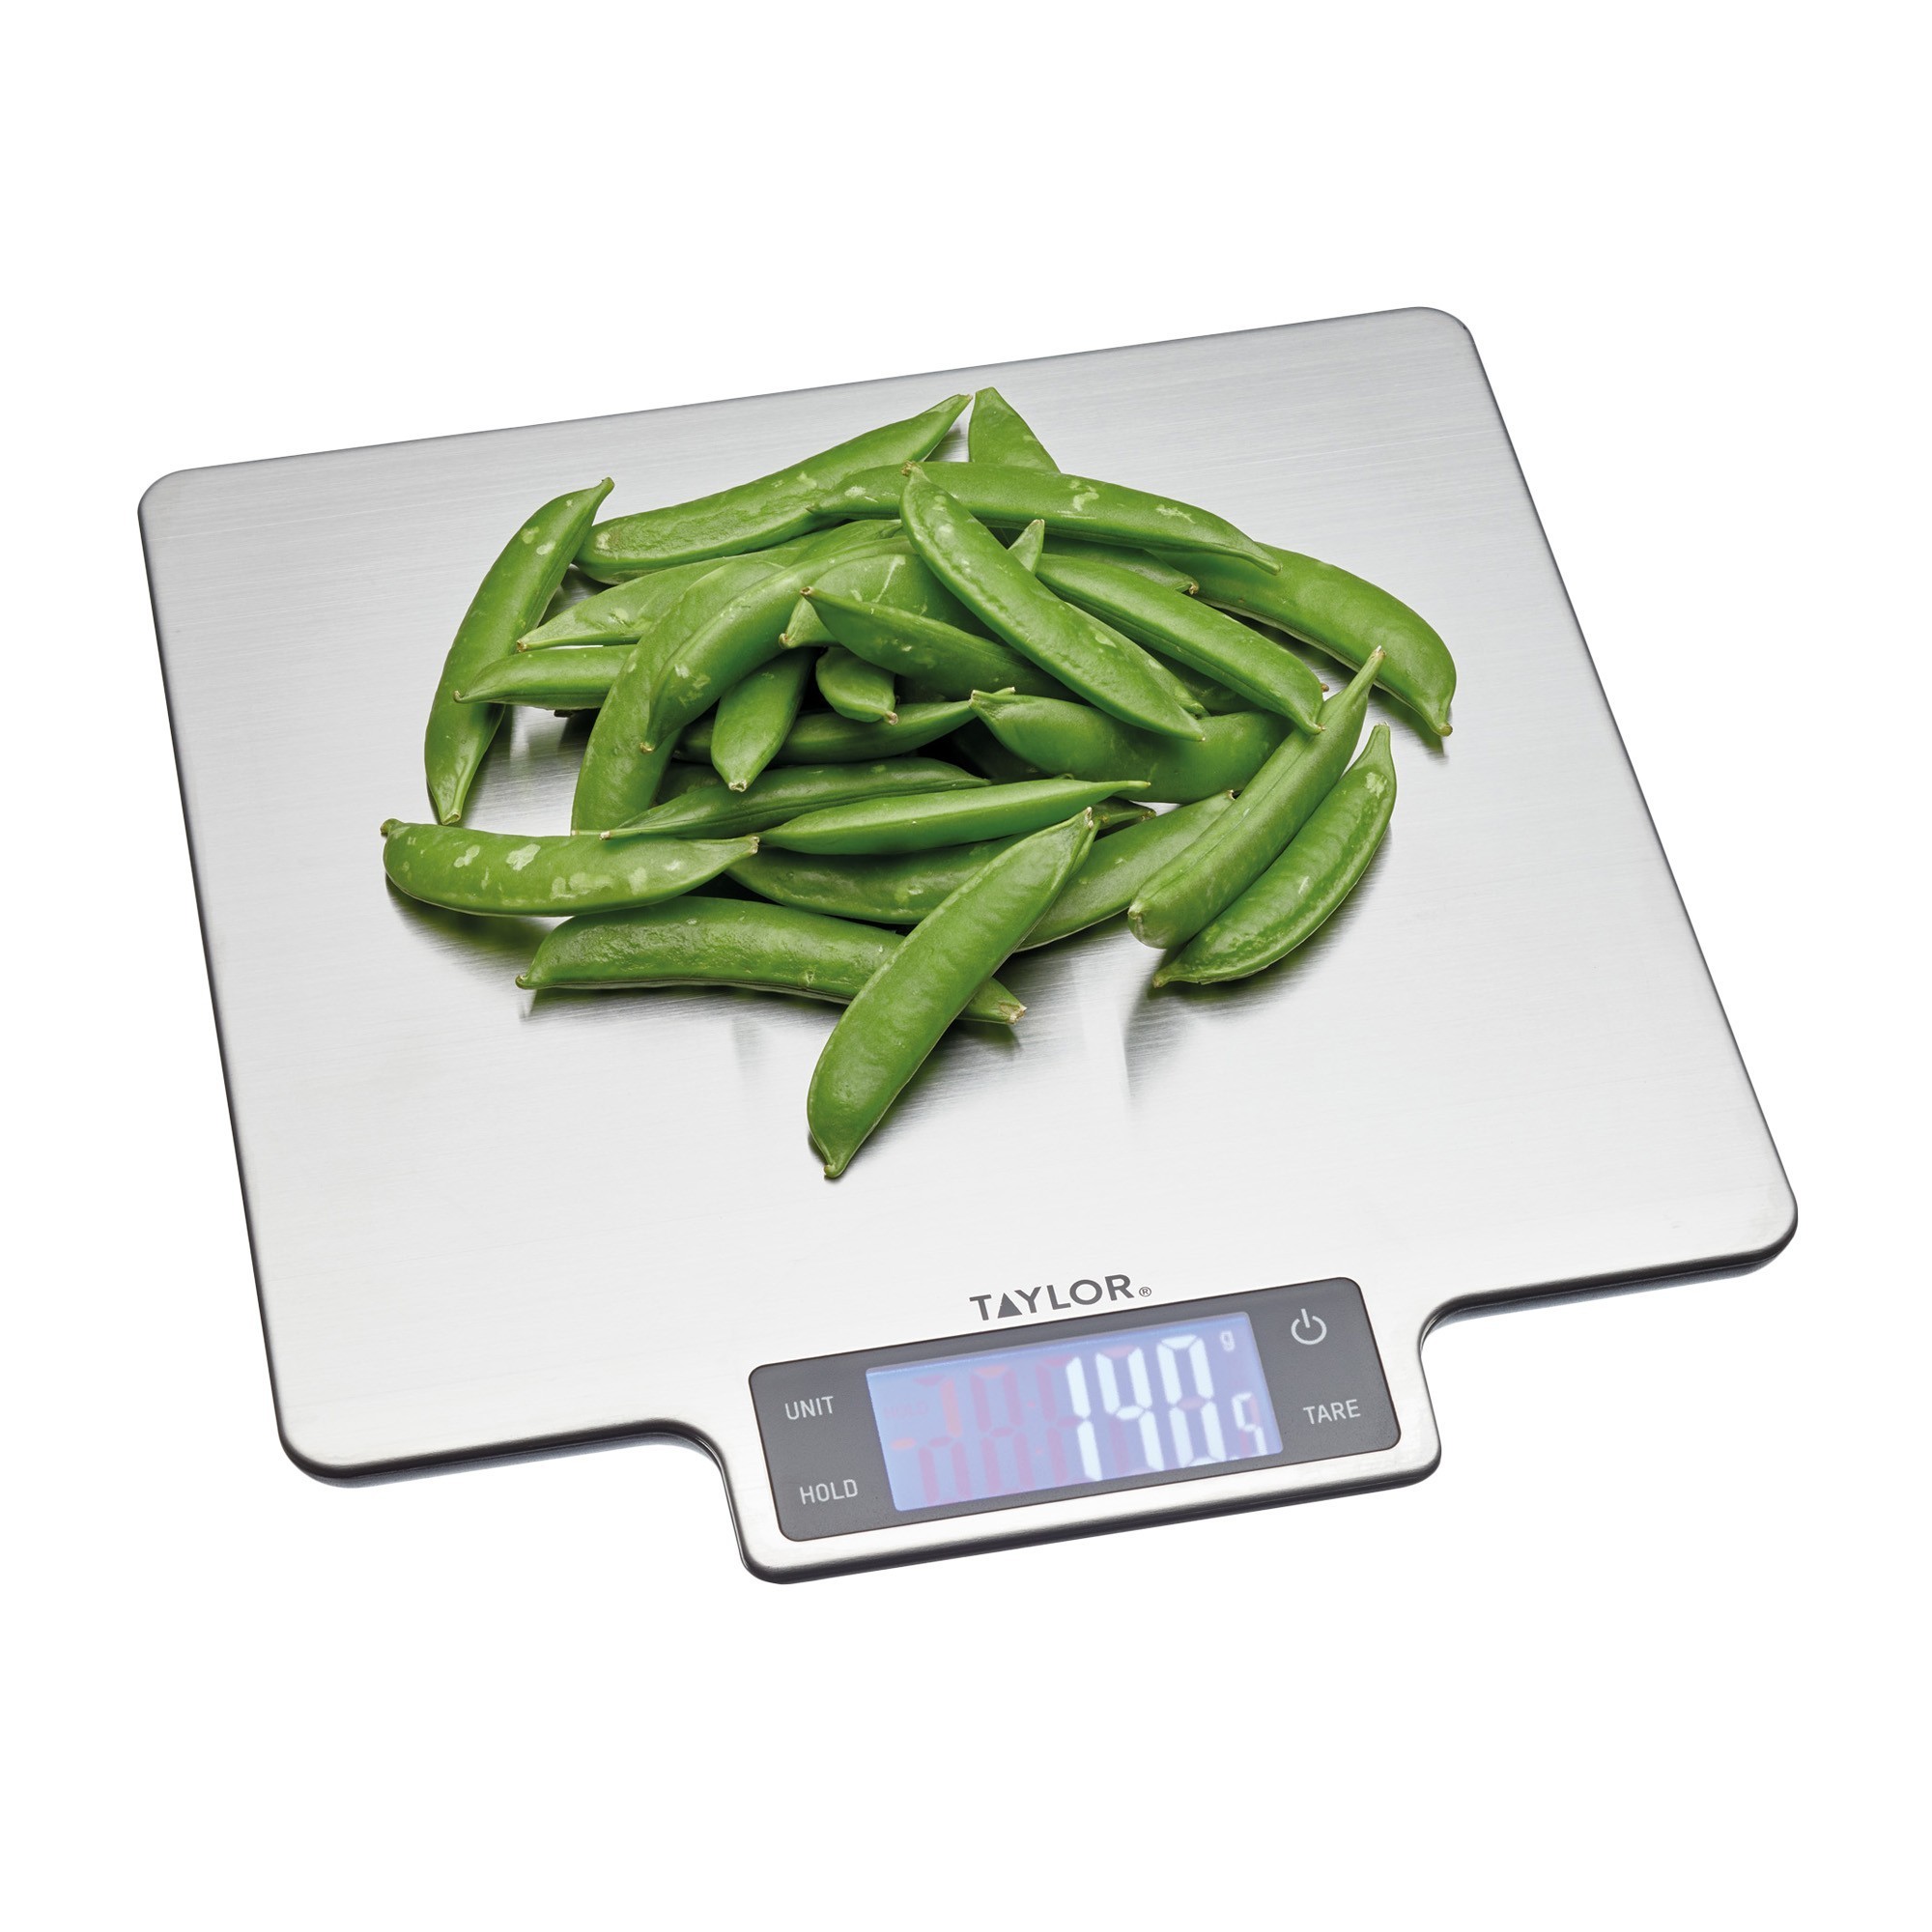 Taylor Precision Products Stainless Steel Digital Kitchen Scale